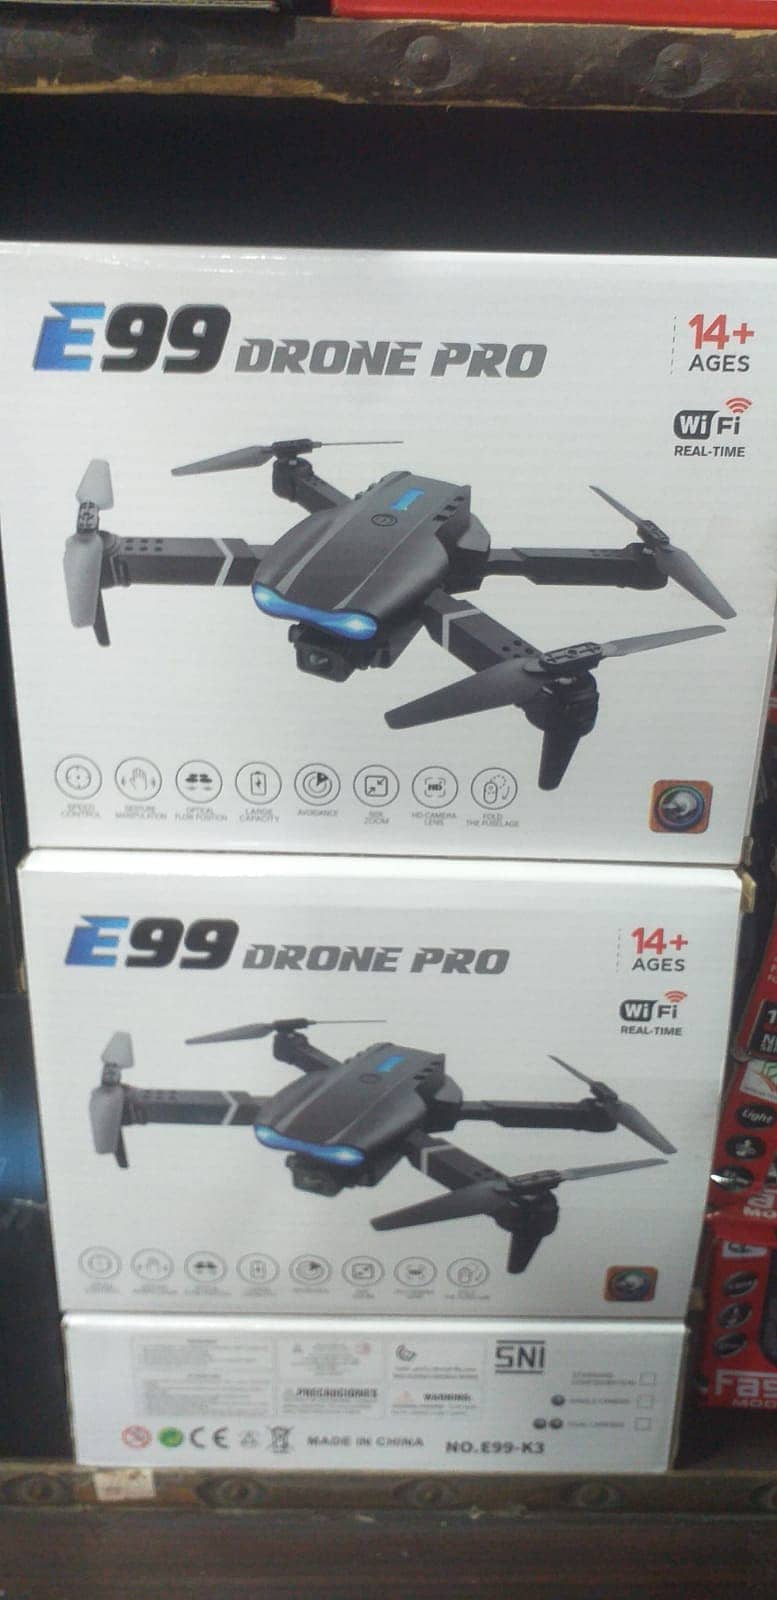 Drone without camera k3 drone toy for kids rechargeable remot control 3